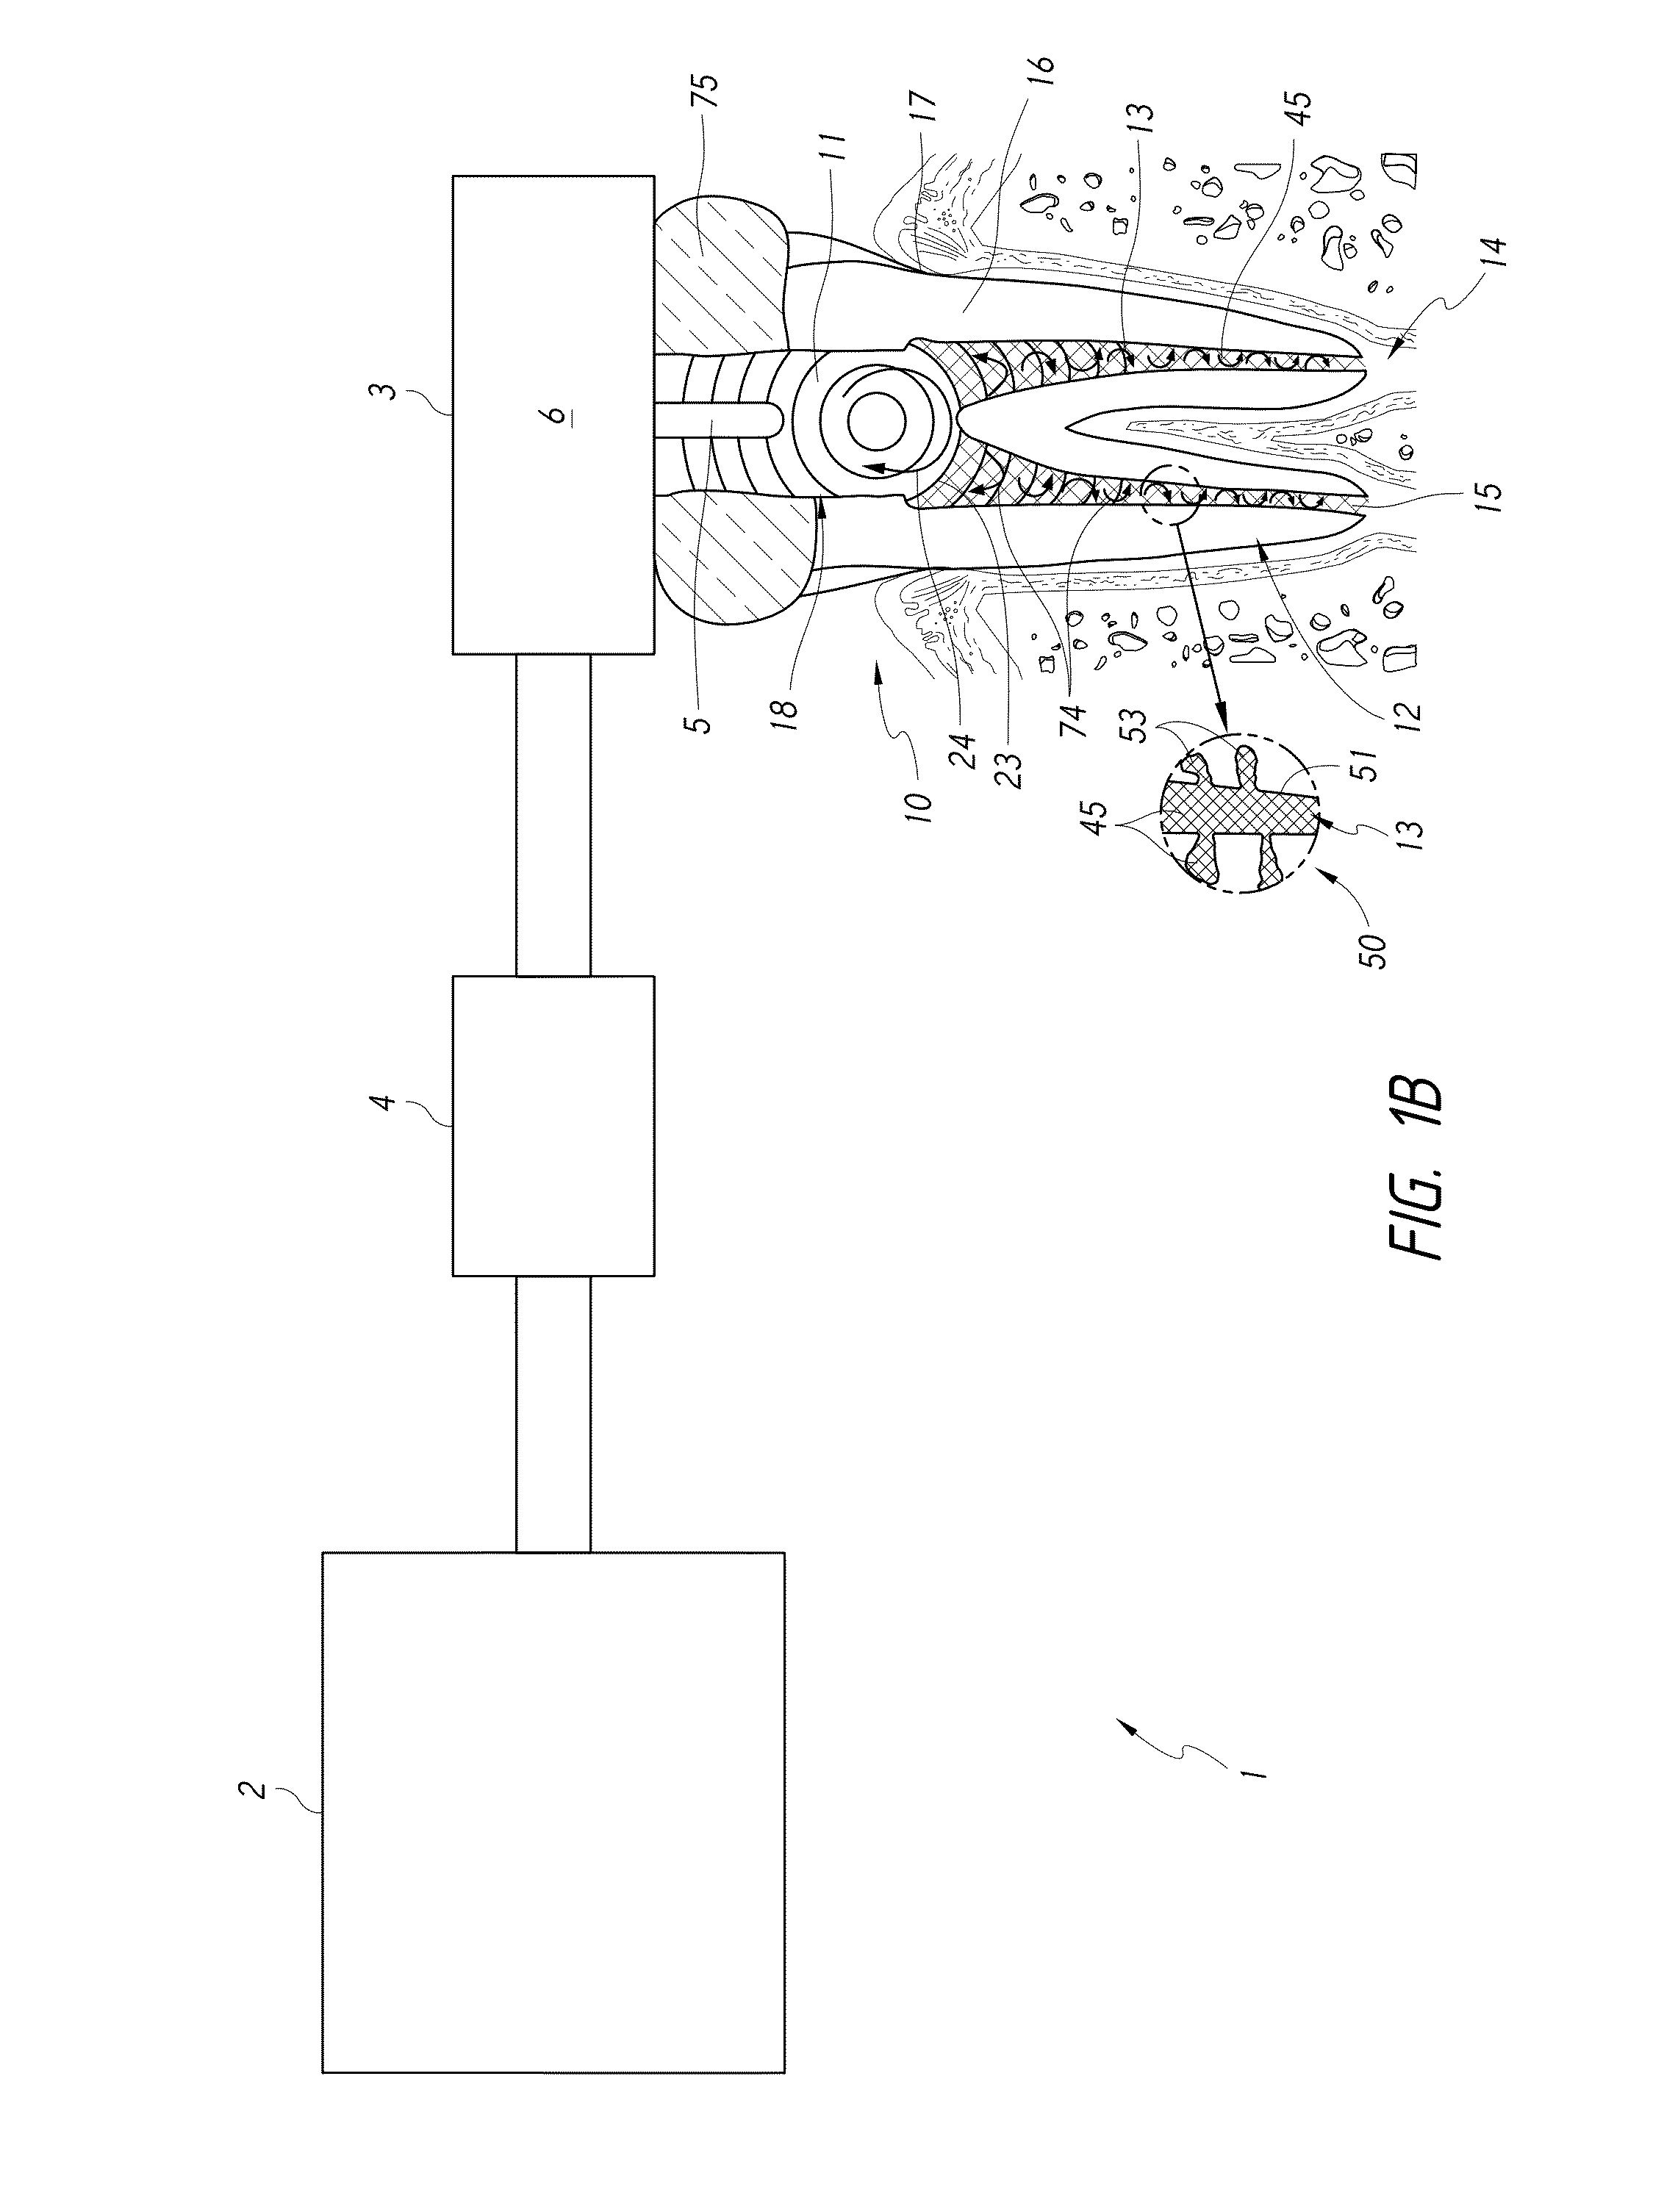 Apparatus and methods for filling teeth and root canals